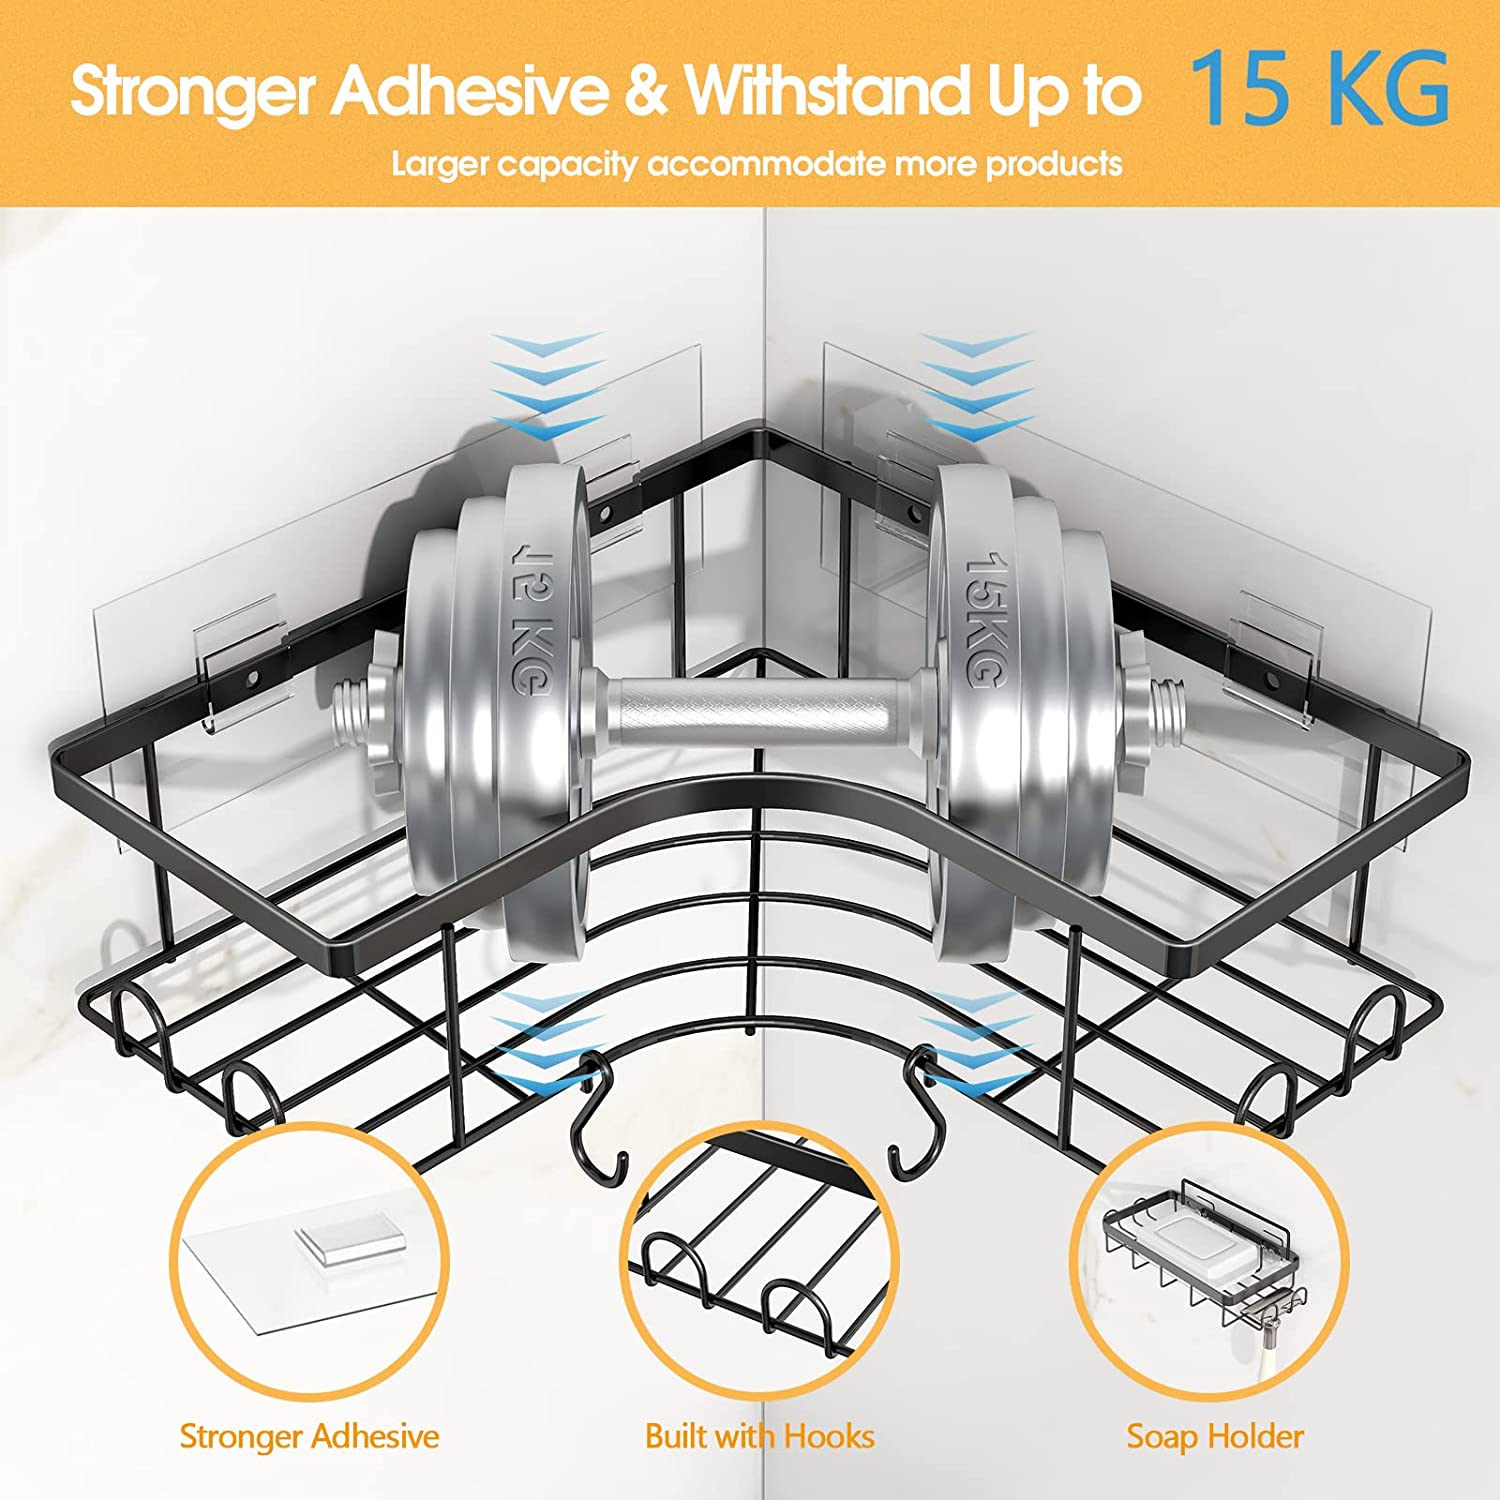 shower caddies with strong adhesive and withstand up to 15kg